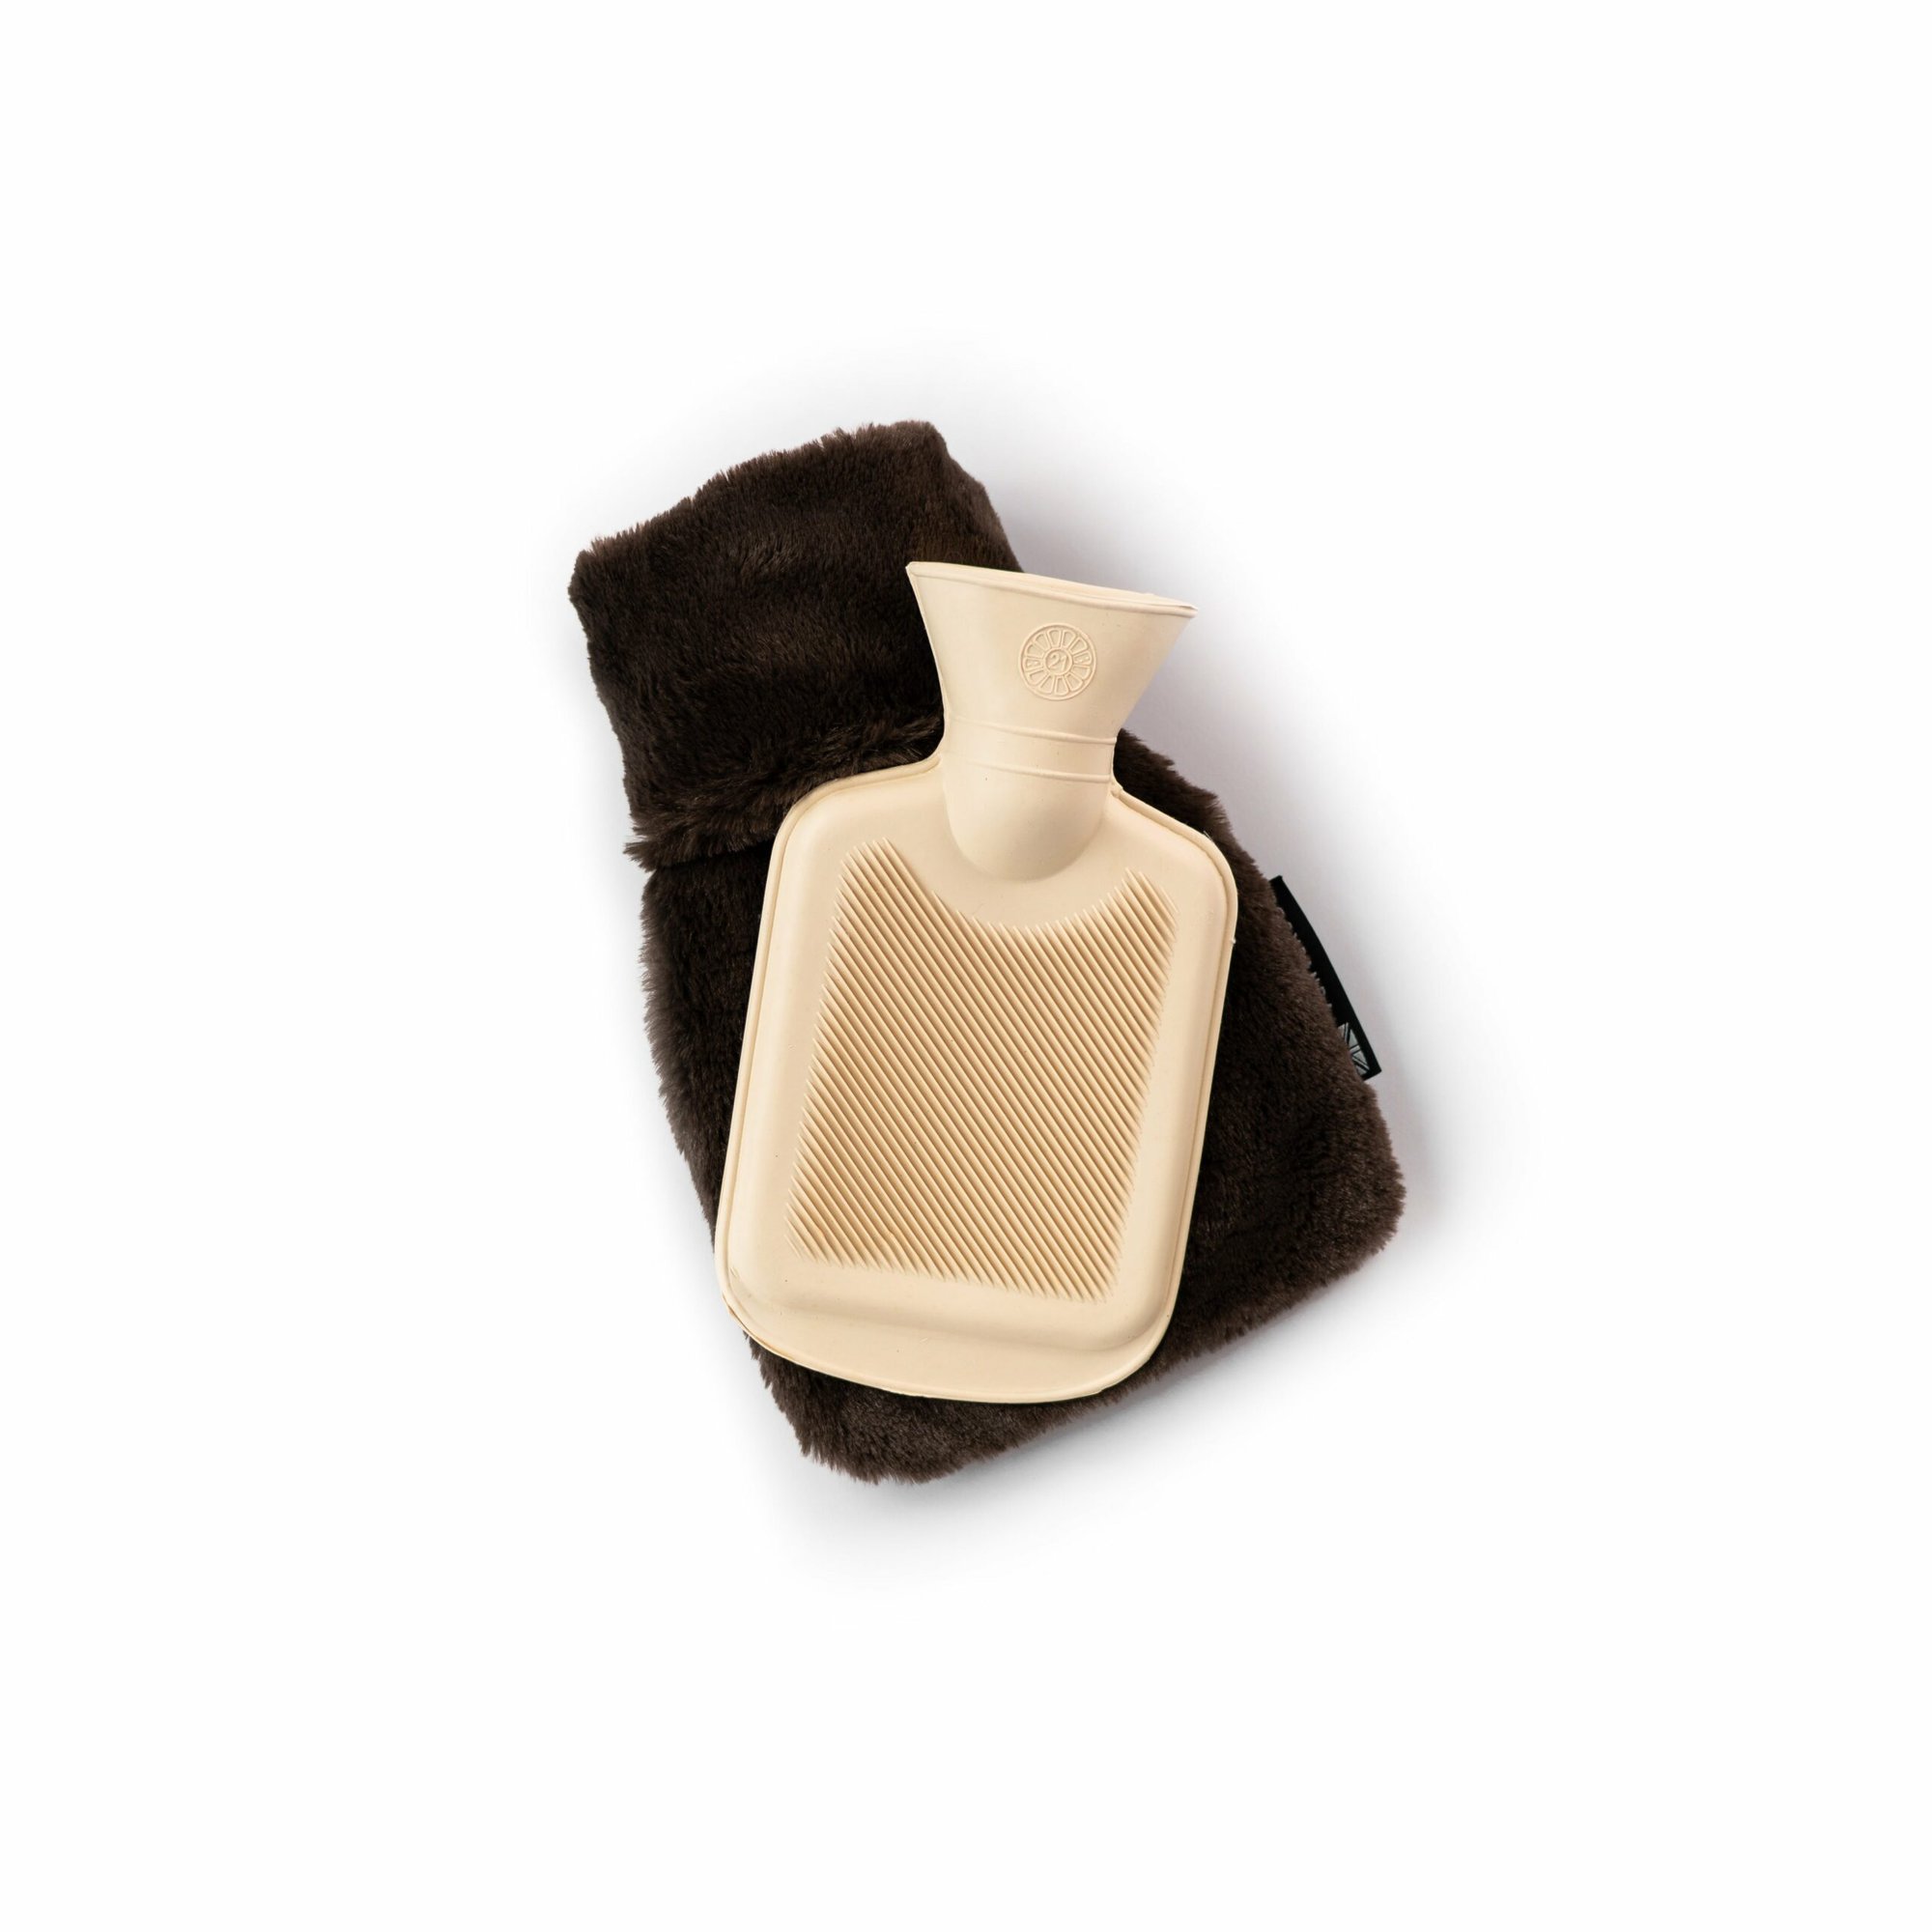 Mini Dark Chocolate Faux Fur Cover And 0.5 Litre Natural Rubber Hot Water Bottle